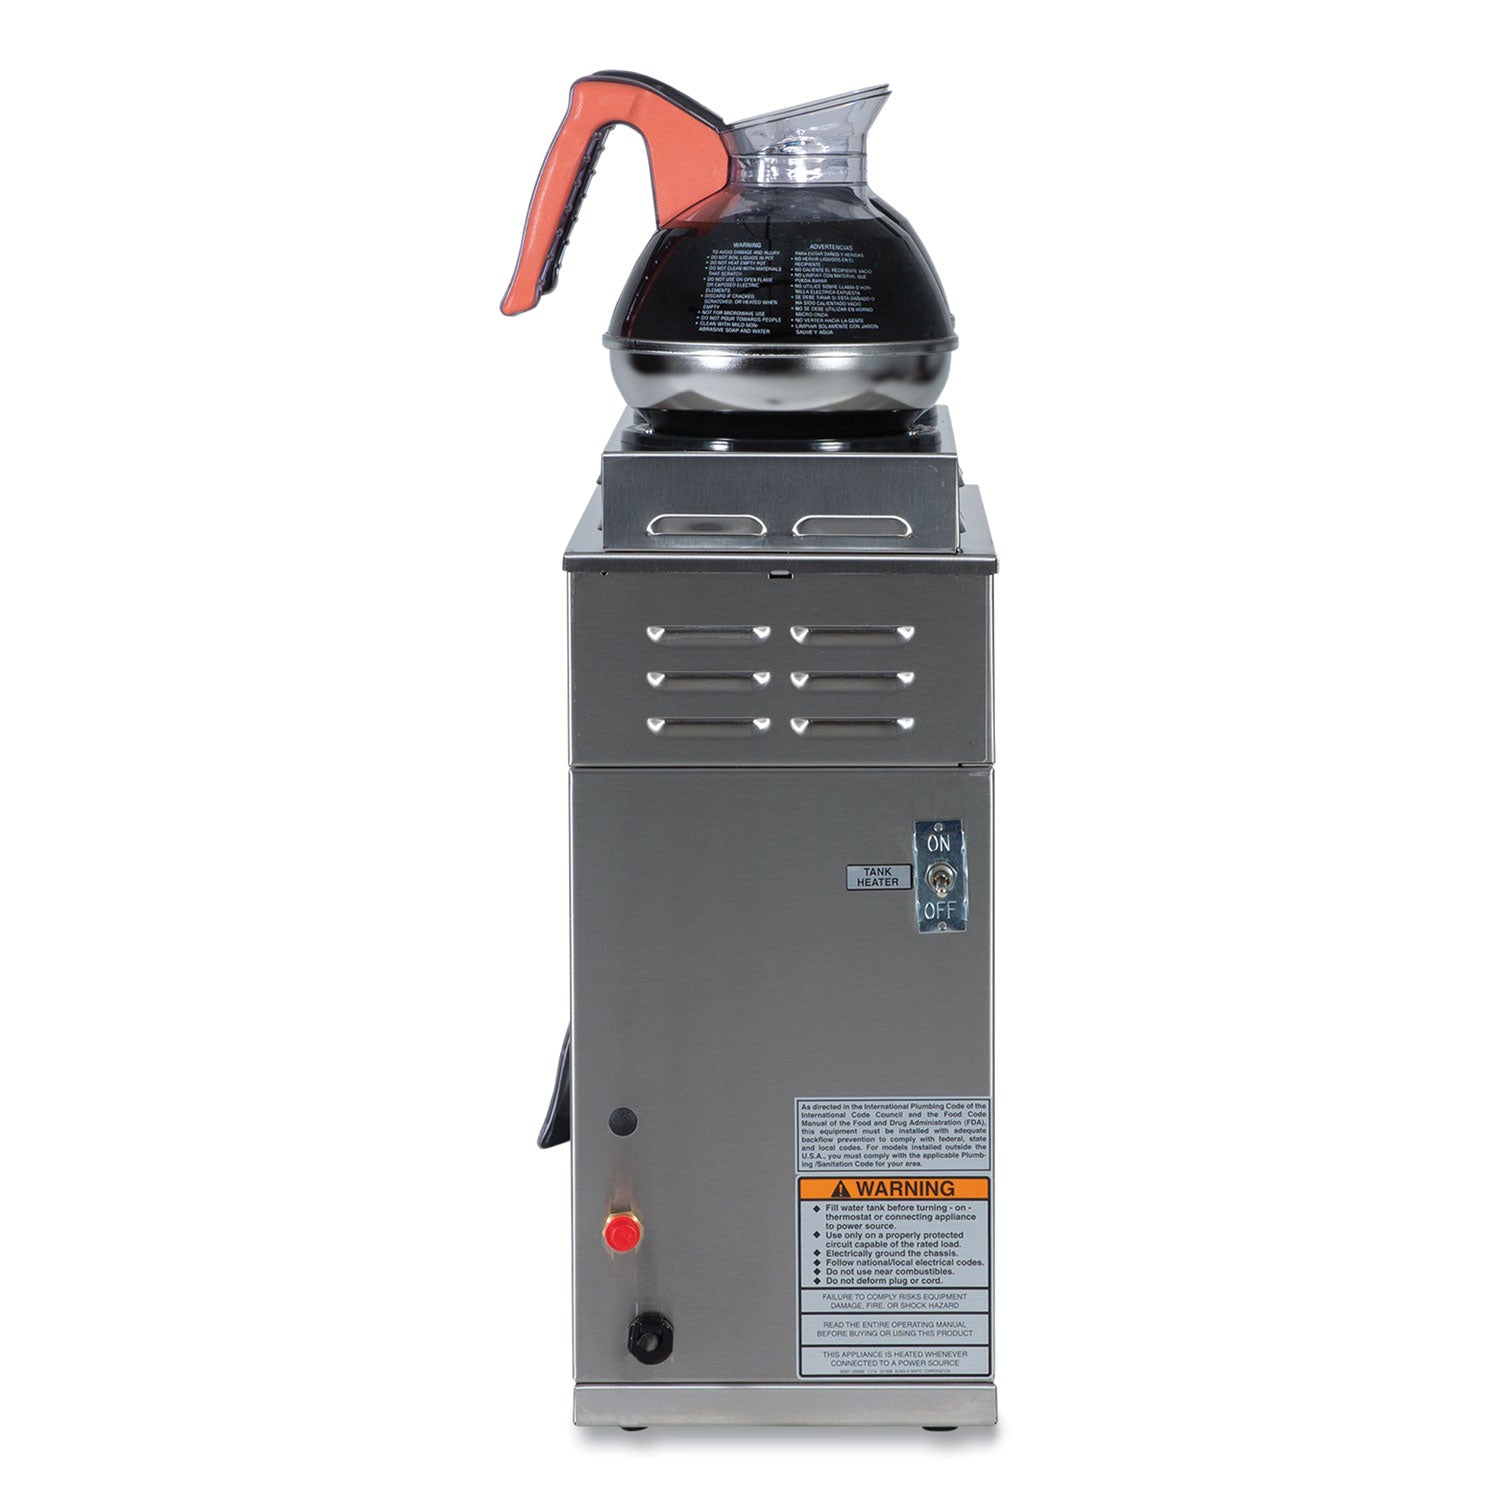 cwtf15-3-12-cup-automatic-coffee-brewer-gray-stainless-steel-ships-in-7-10-business-days_bun129500213 - 7